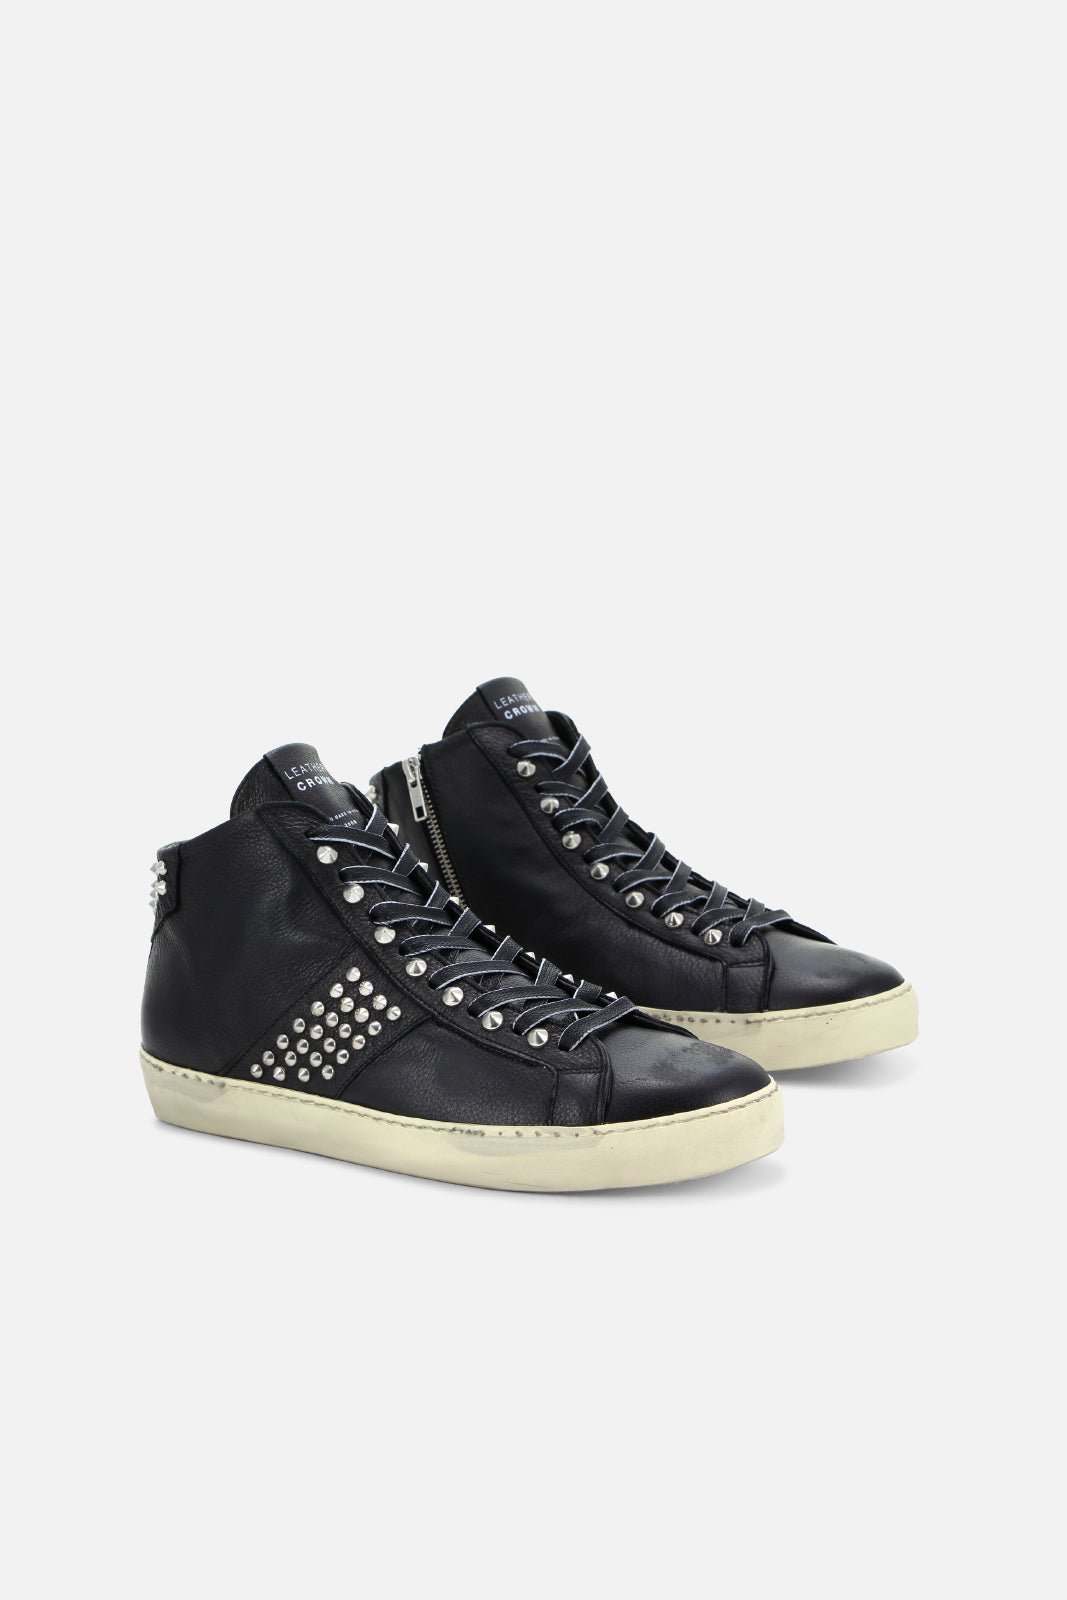 crown leather sneakers